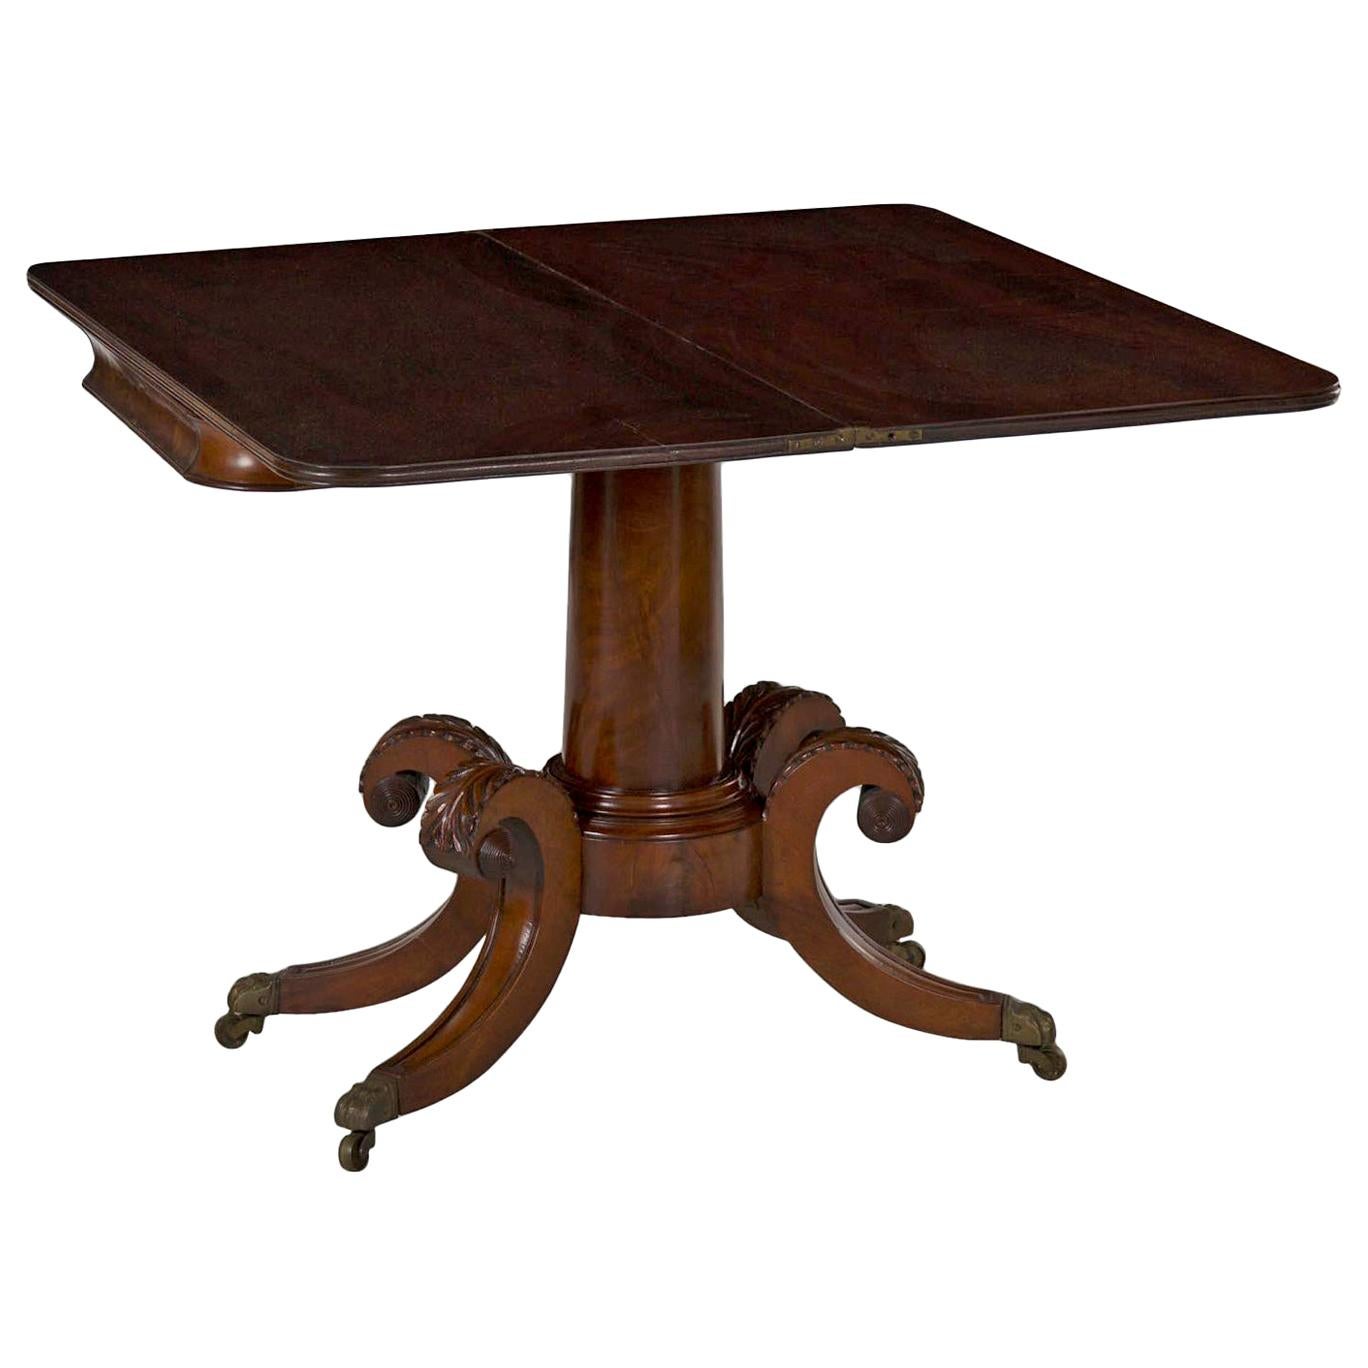 This fine American Classical card table features a pair of full width planks of mahogany with integral molded ends that rotate 90 degrees and flip open on original brass hinges to create a broad card playing surface. Typical of the form, the apron